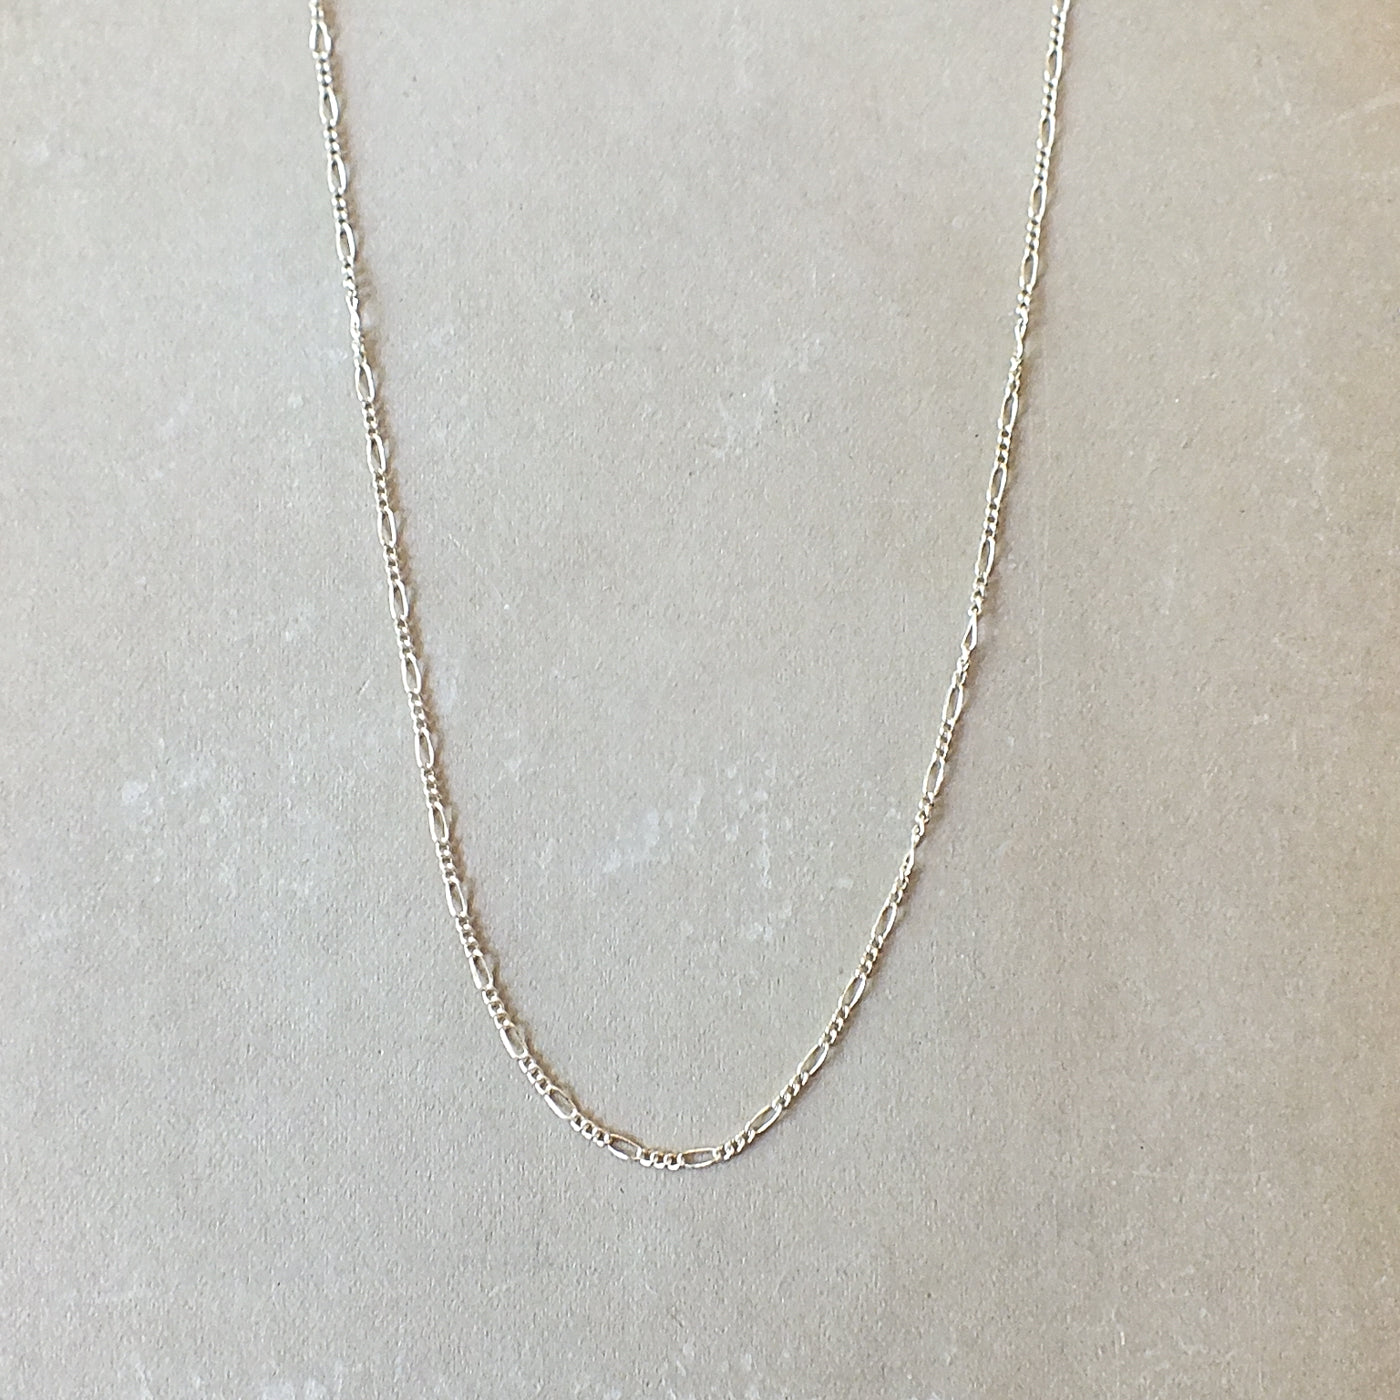 Gold filled Becoming Jewelry Figaro chain necklace on a textured grey background.